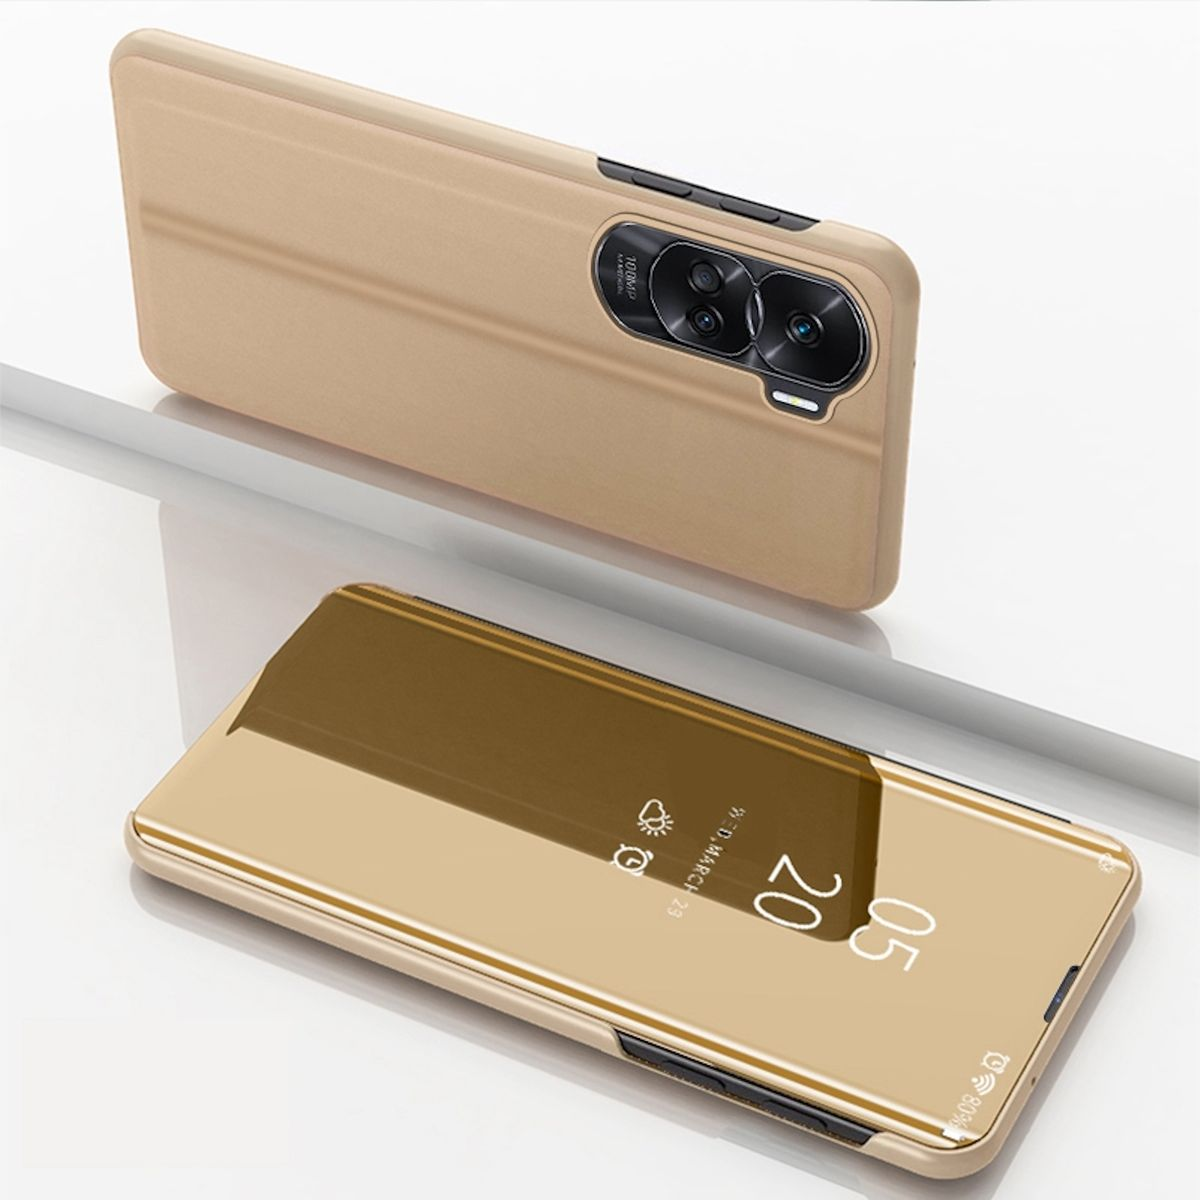 UP mit Funktion, Cover, View Honor, Lite, WIGENTO Smart Full Spiegel Gold Cover 90 Wake Mirror